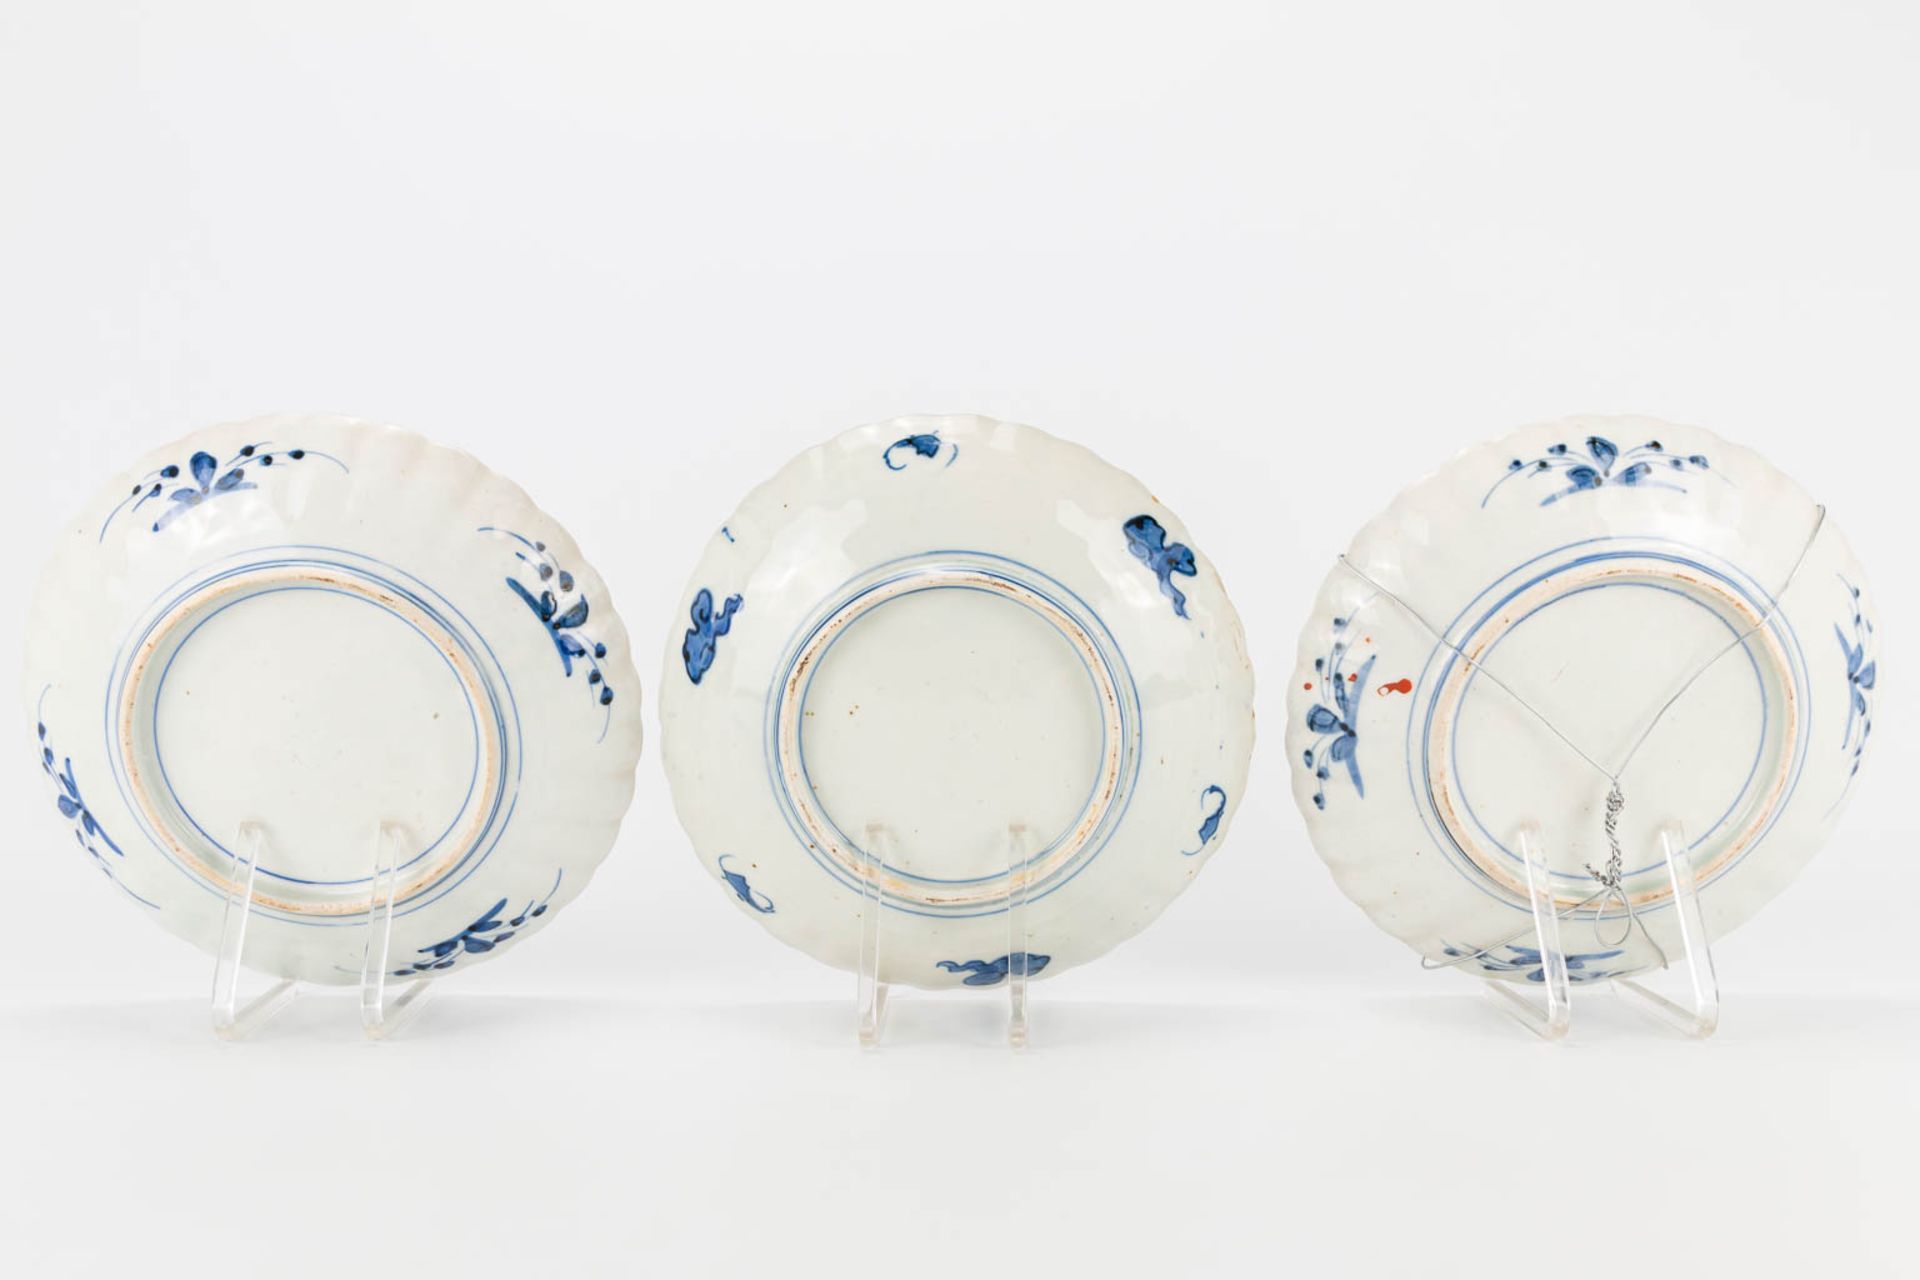 An assembled collection of 10 plates made of Japanese porcelain, Imari, blue white. (4 x 25 cm) - Image 4 of 16